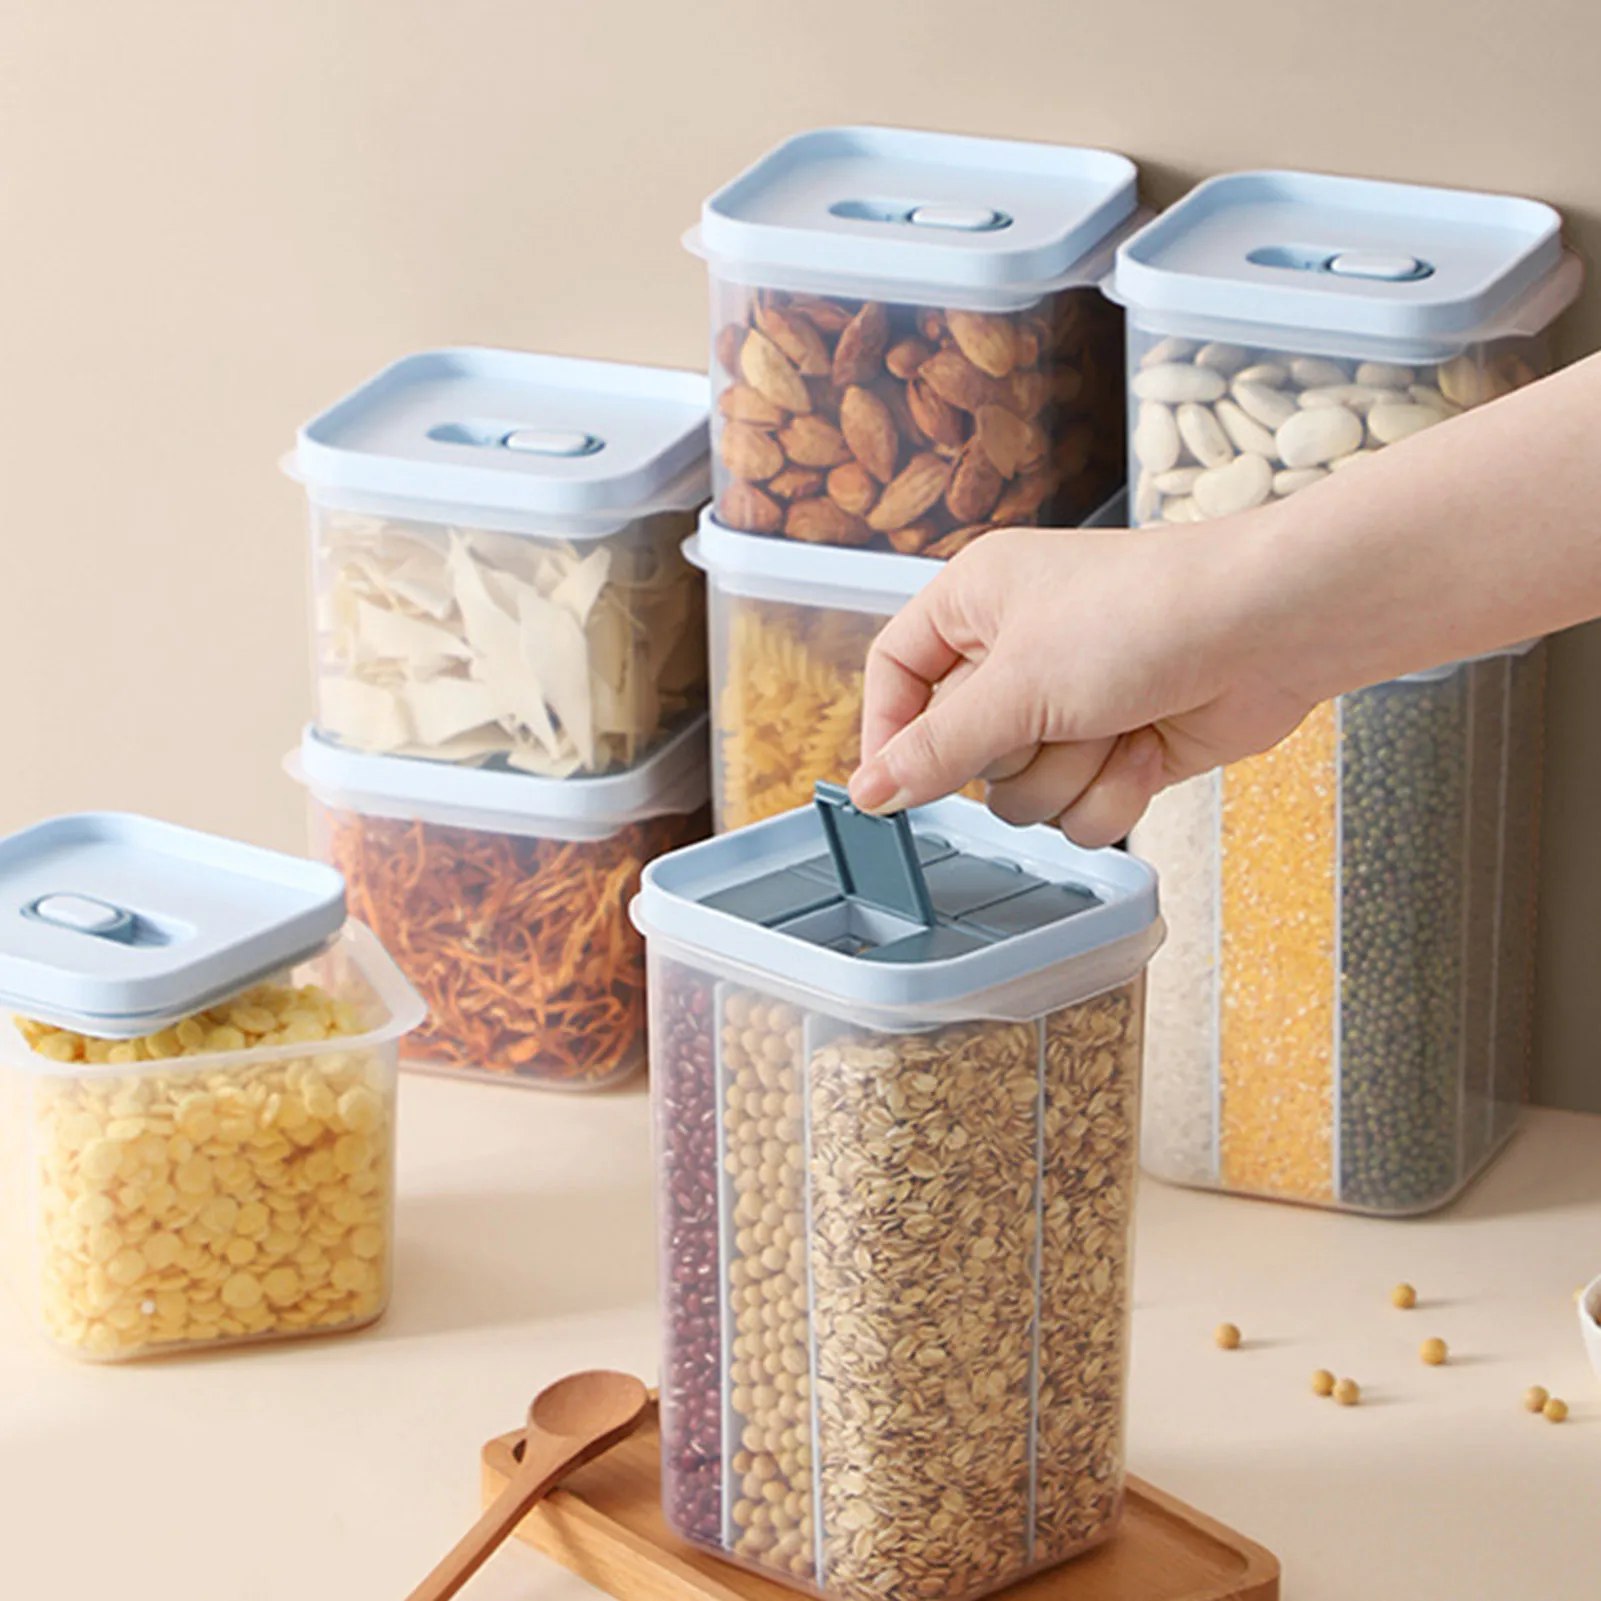 https://ae01.alicdn.com/kf/Sdcf807a081fa43cdbe49d202c993f70c0/Food-Storage-Containers-Airtight-Containers-For-Food-Moisture-proof-Airtight-Space-Saver-Jars-With-Lids-Kitchen.jpg